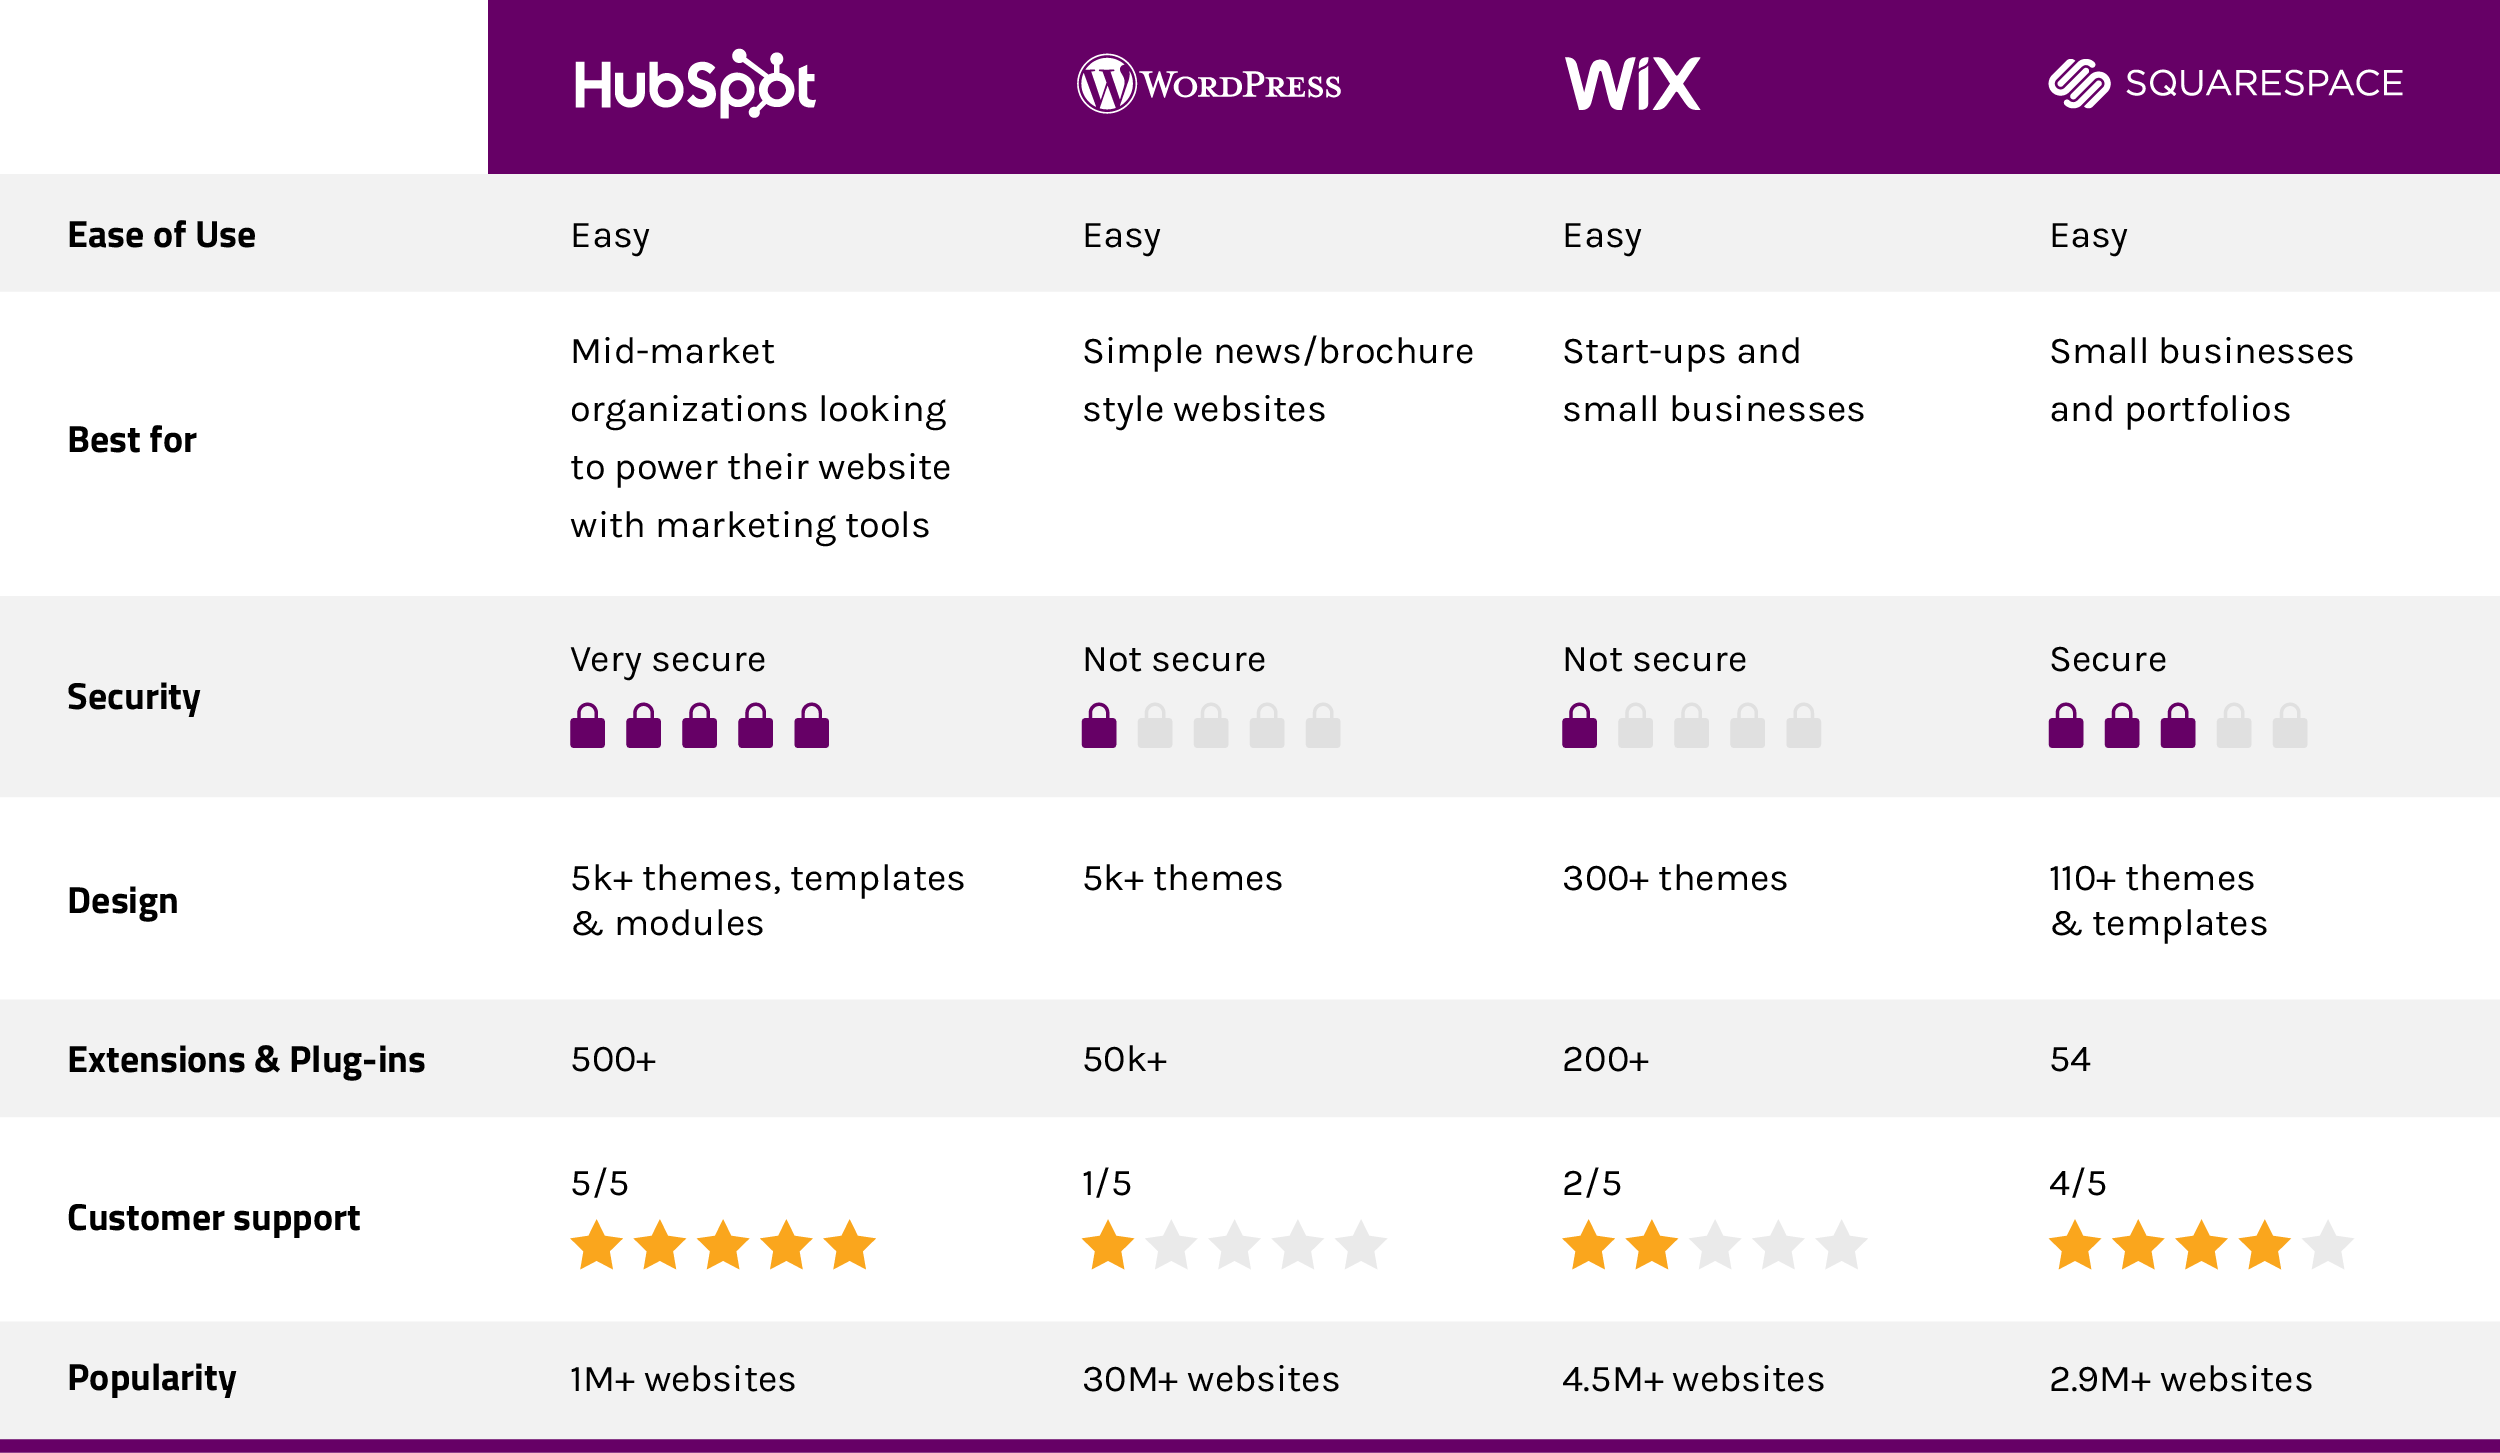 5 Reasons Why HubSpot is The Ultimate Website Solution